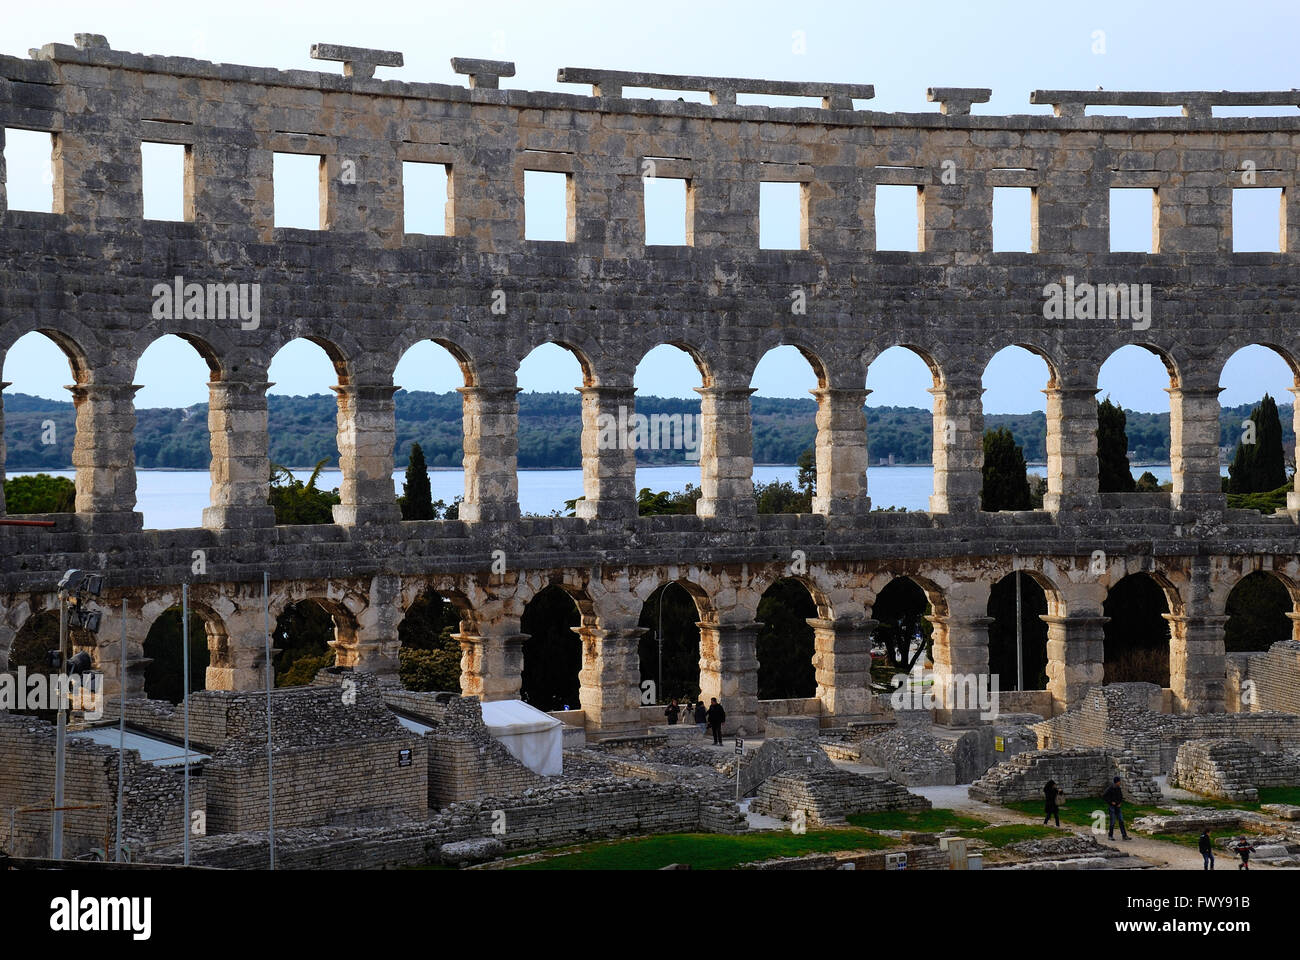 Pula, Istria, Croatia. The Pula Arena is the name of the amphitheatre located in Pula, Croatia. The Arena is the only remaining Roman amphitheatre to have four side towers and with all three Roman architectural orders entirely preserved. It was constructed in 27 BC – 68 AD and is among the six largest surviving Roman arenas in the World. A rare example among the 200 Roman surviving amphitheatres, it is also the best preserved ancient monument in Croatia. The arena is used as a venue for many concerts. Stock Photo